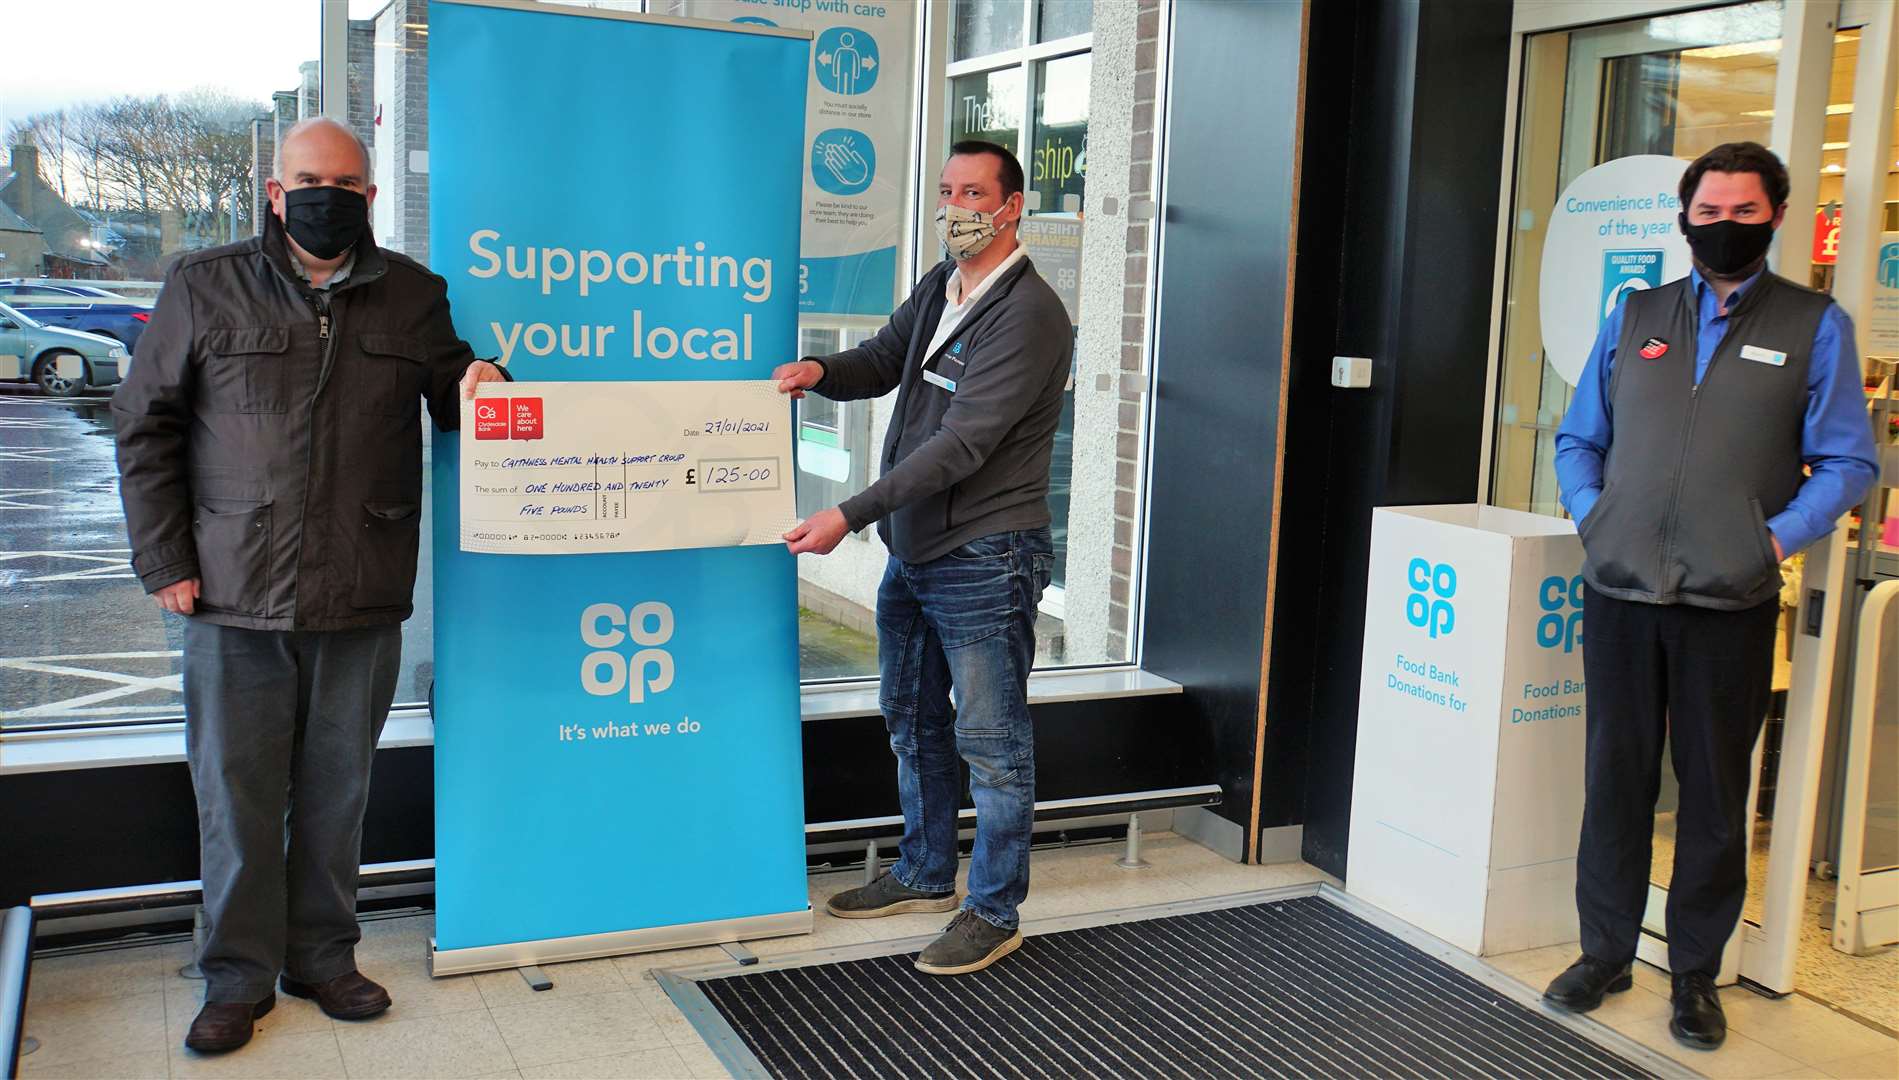 From left, Chris Mackenzie, group manager for Caithness Mental Health Support Group receiving the £125 cheque, Jamie Robson Community and Shared Value representative with the Co-op and the supermarket manager Modris Karklins. Picture: DGS